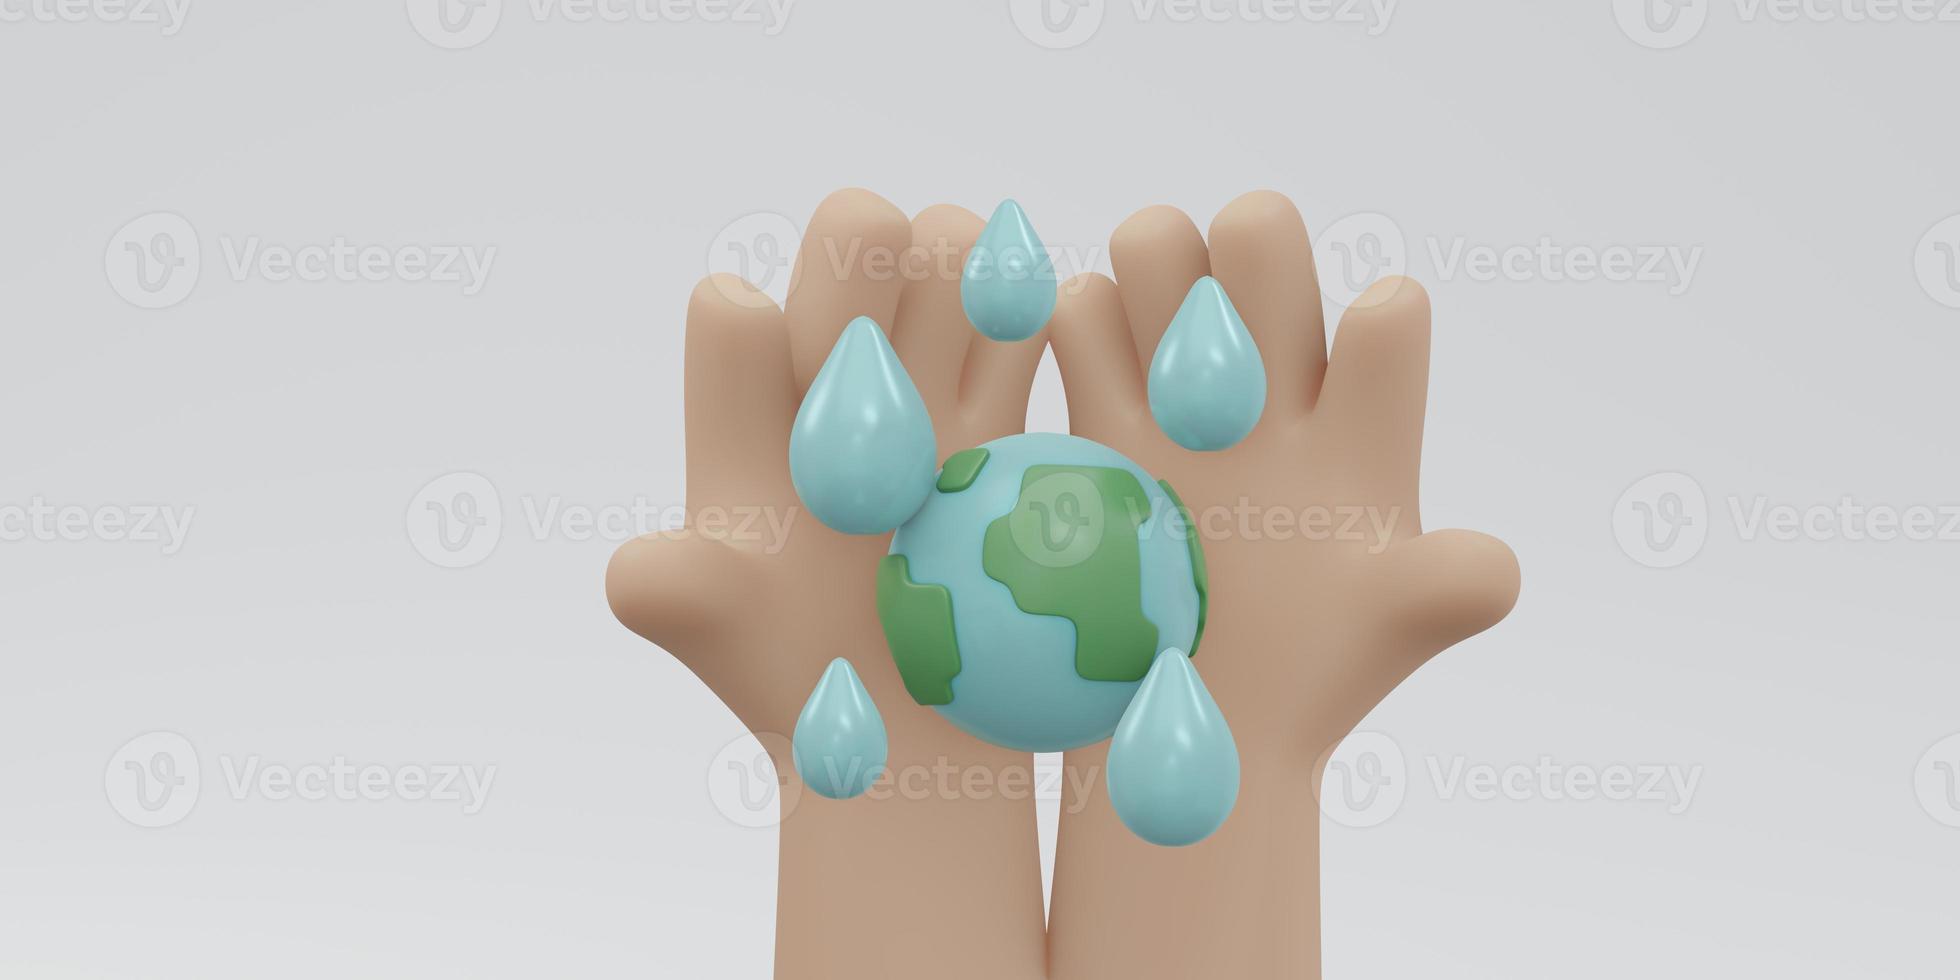 3D Rendering of hand holding earth icon with water drop with copy space on white background concept of world water day. 3D Render illustration cartoon style. photo